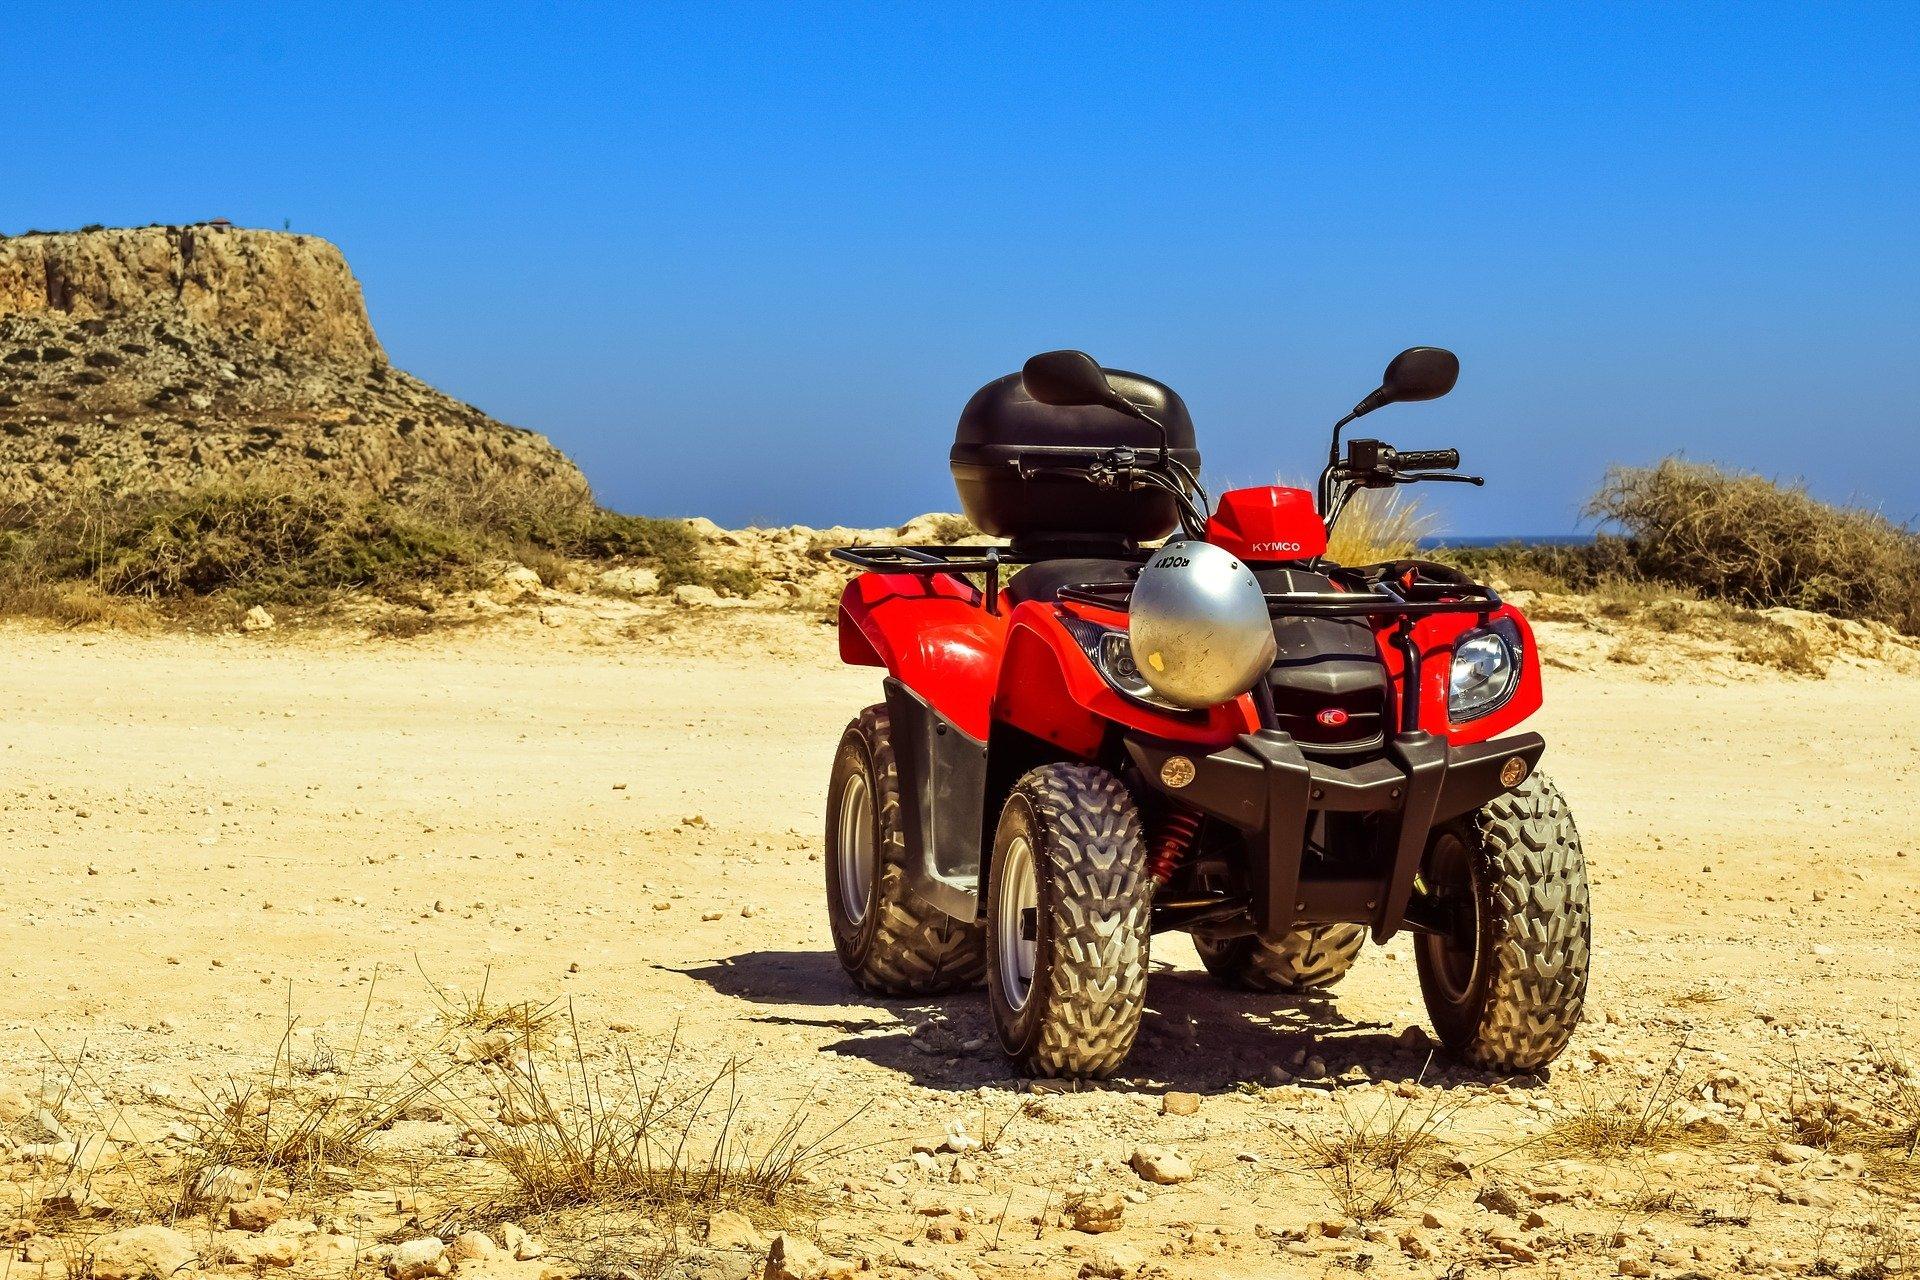 Red KYMCO ATV Quad (Dune Buggy) HD Wallpaper. Background Image